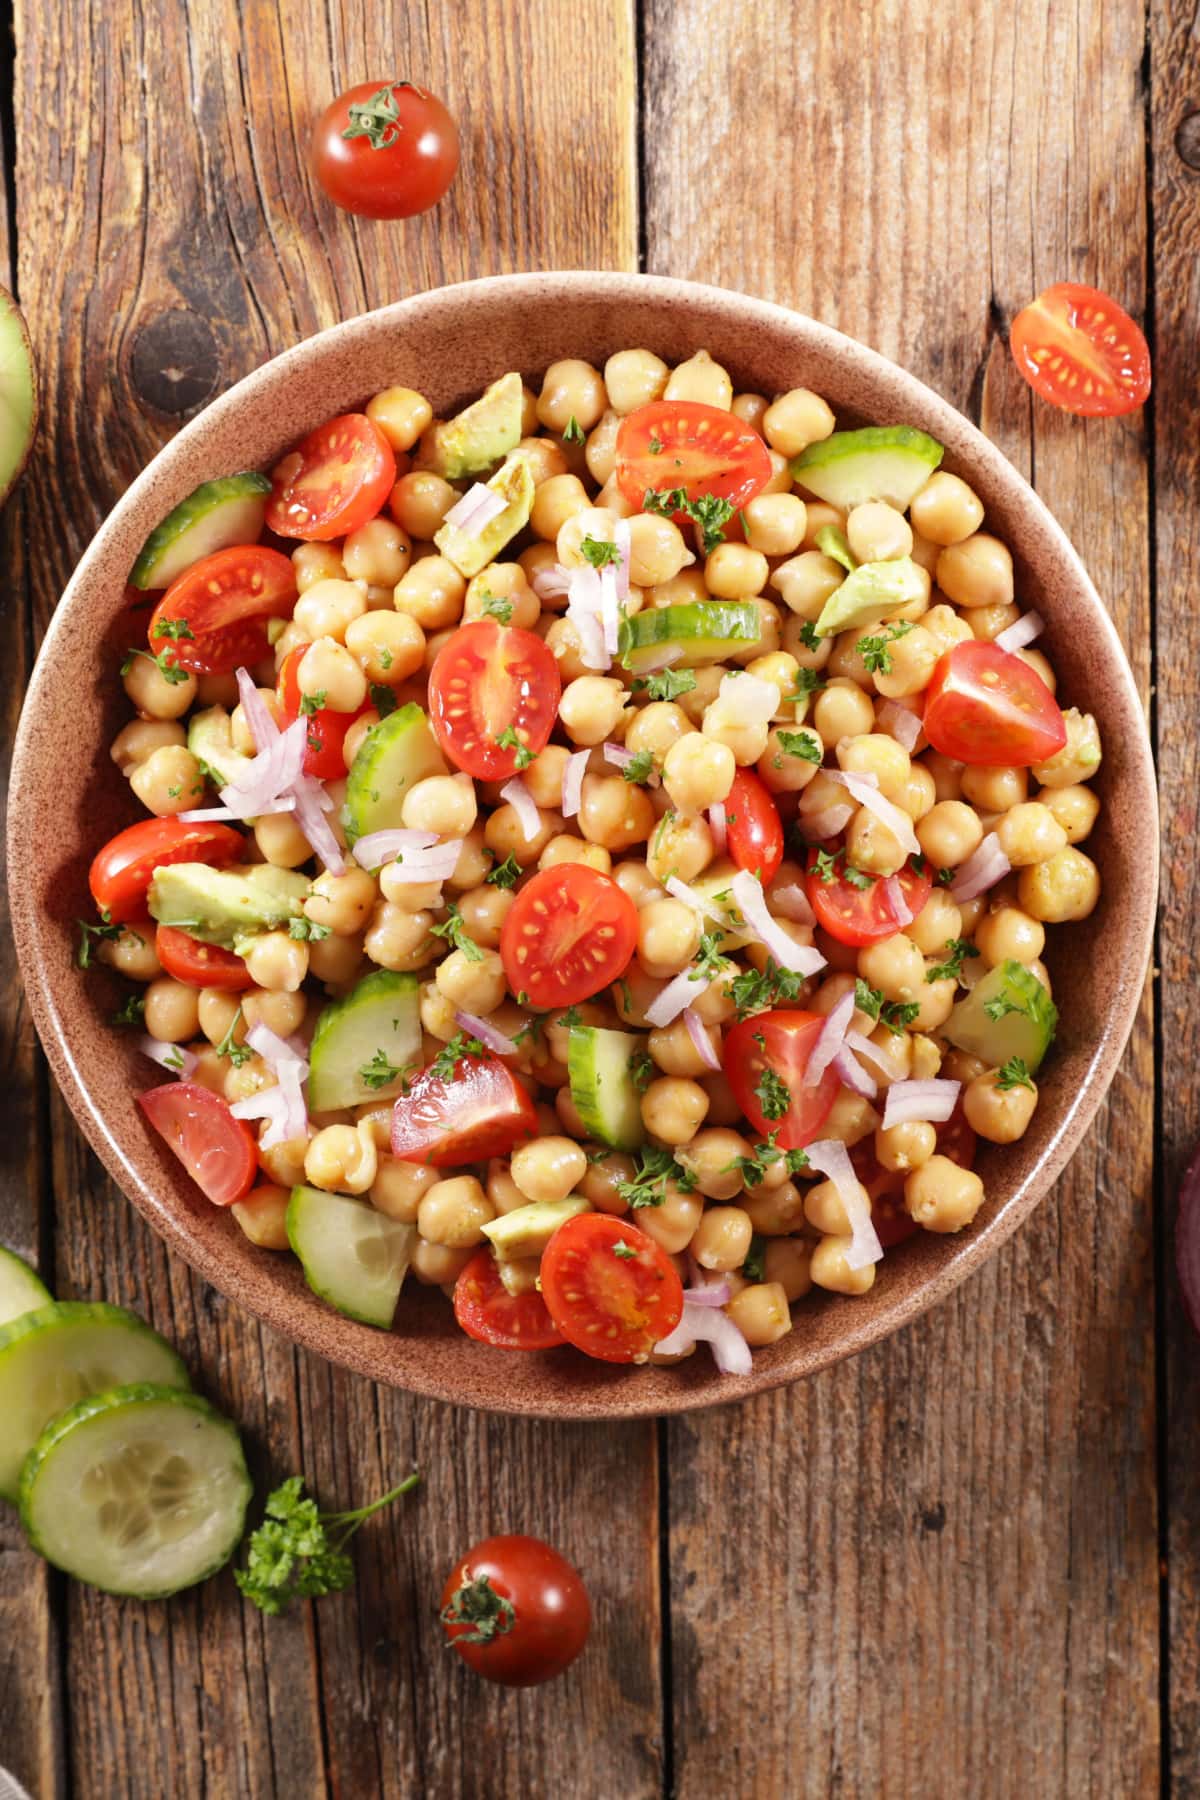 Easy Chickpea Salad Recipe: Chickpea salad in a wooden bowl with  chickpeas, juicy tomatoes, crunchy cucumbers, creamy avocado.